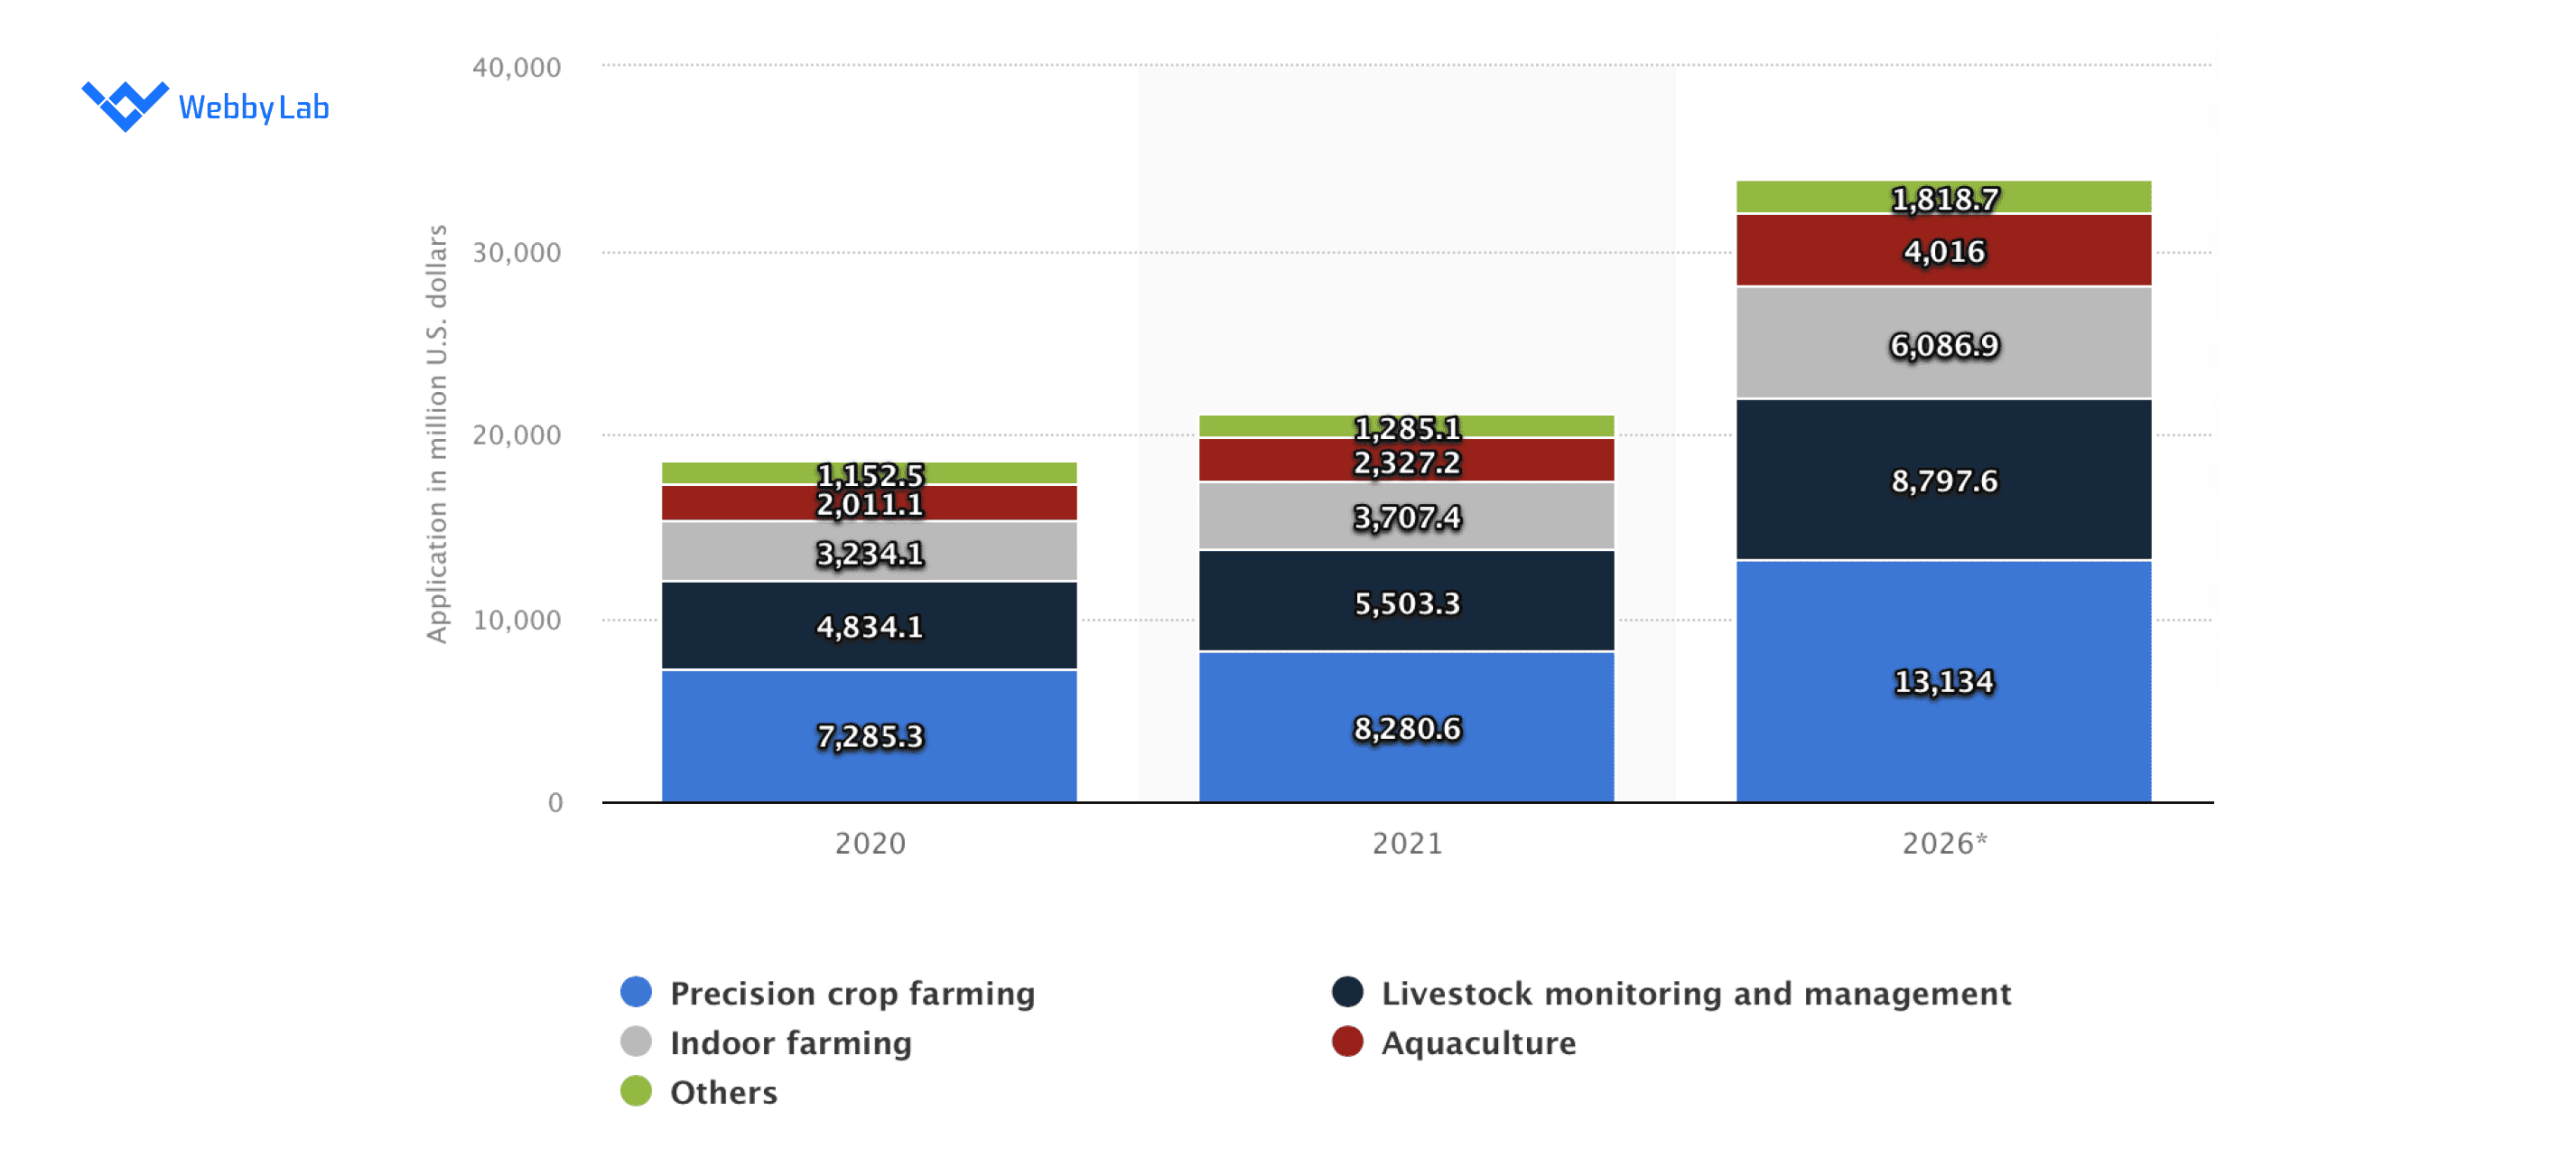 The investment in various IoT applications in agriculture.